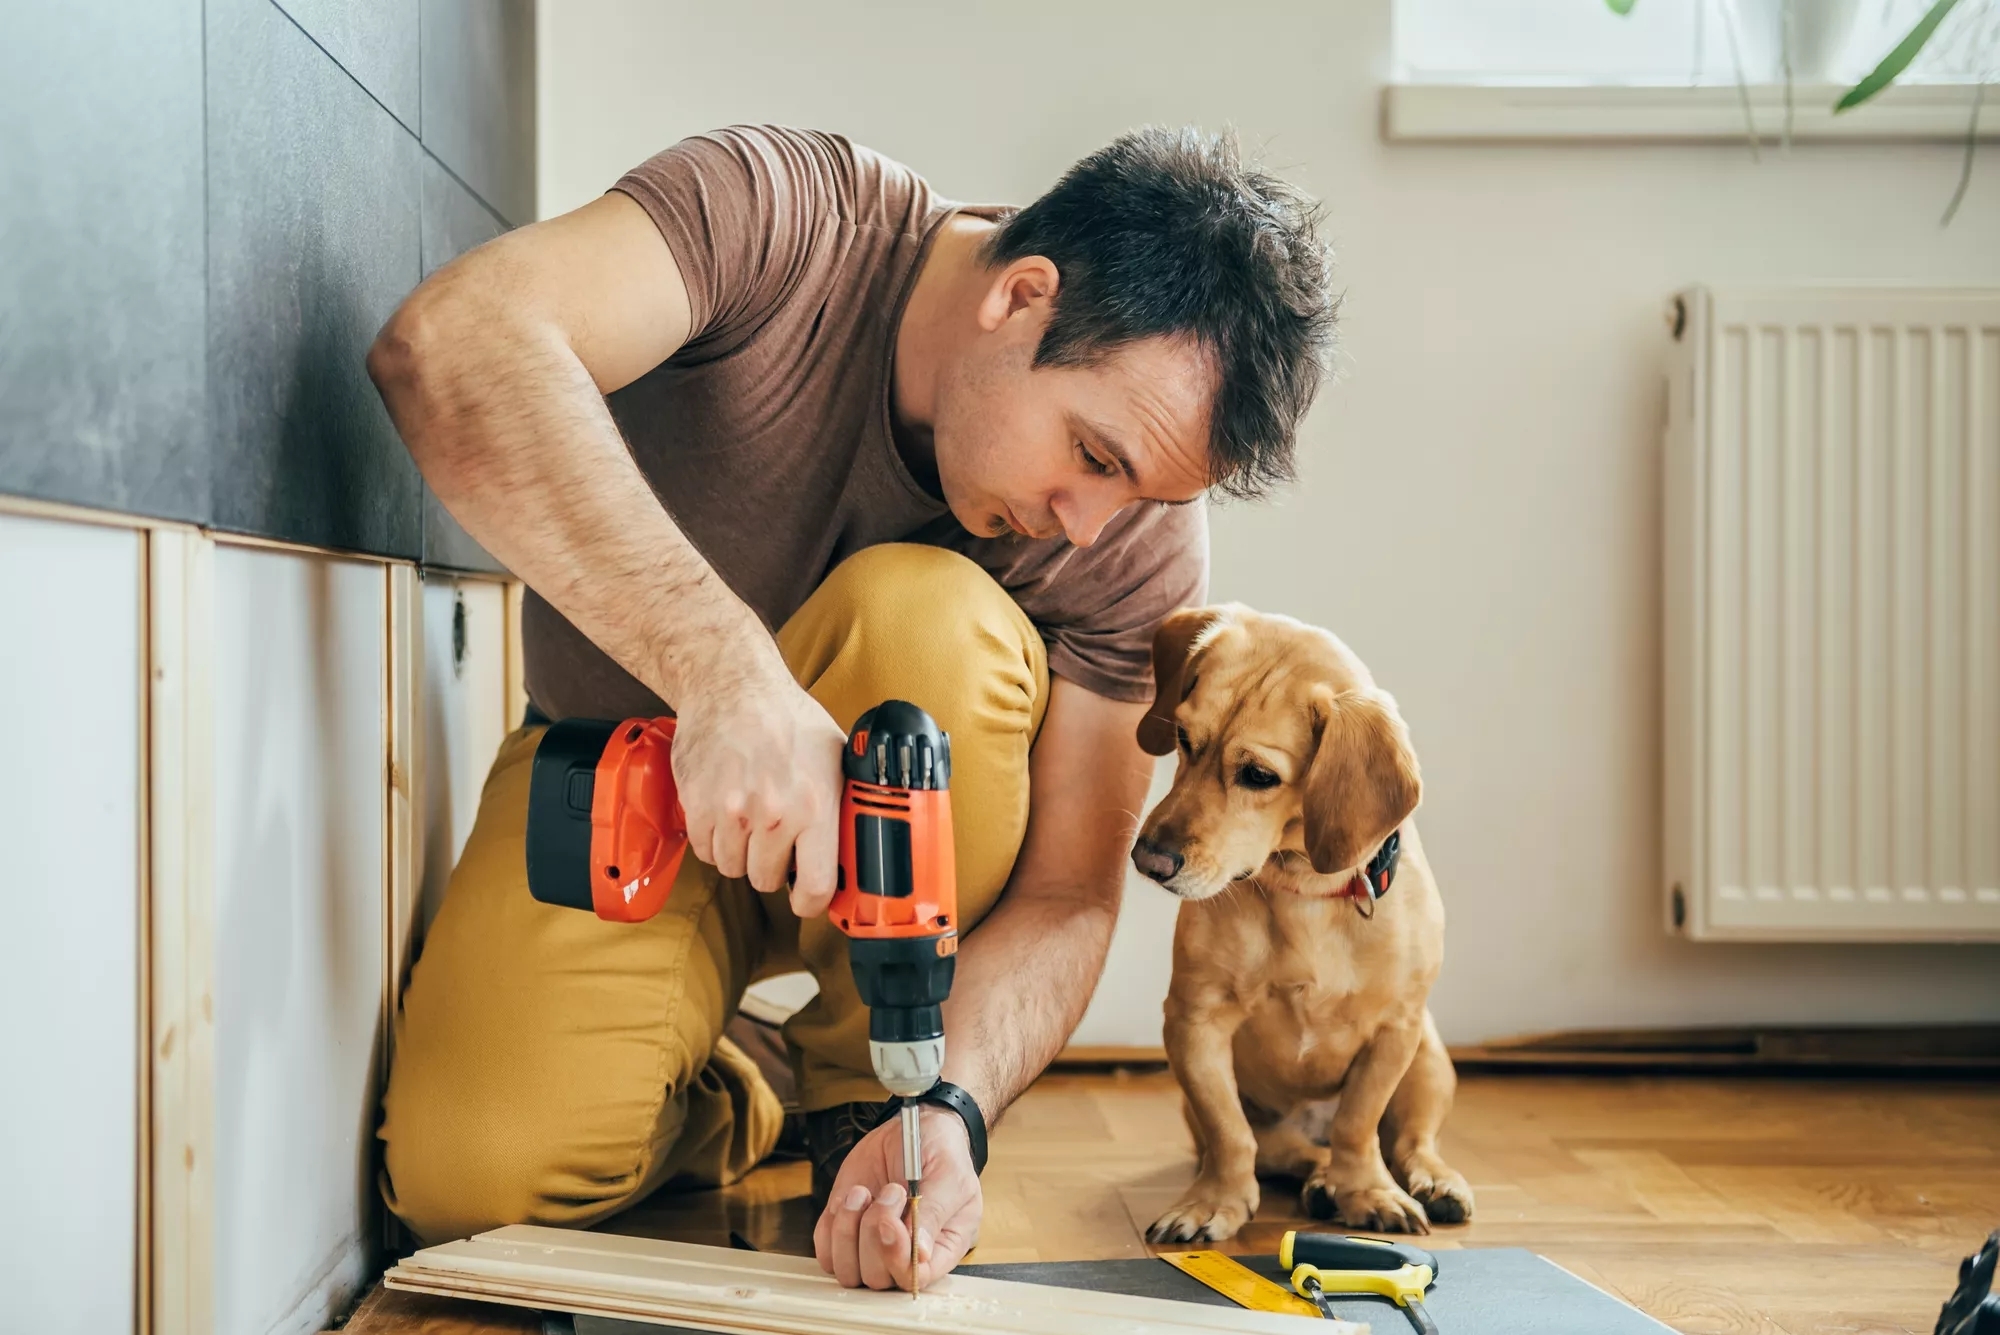 An adorable puppy looking curiously to a man crouching down operating a power drill into the floor.